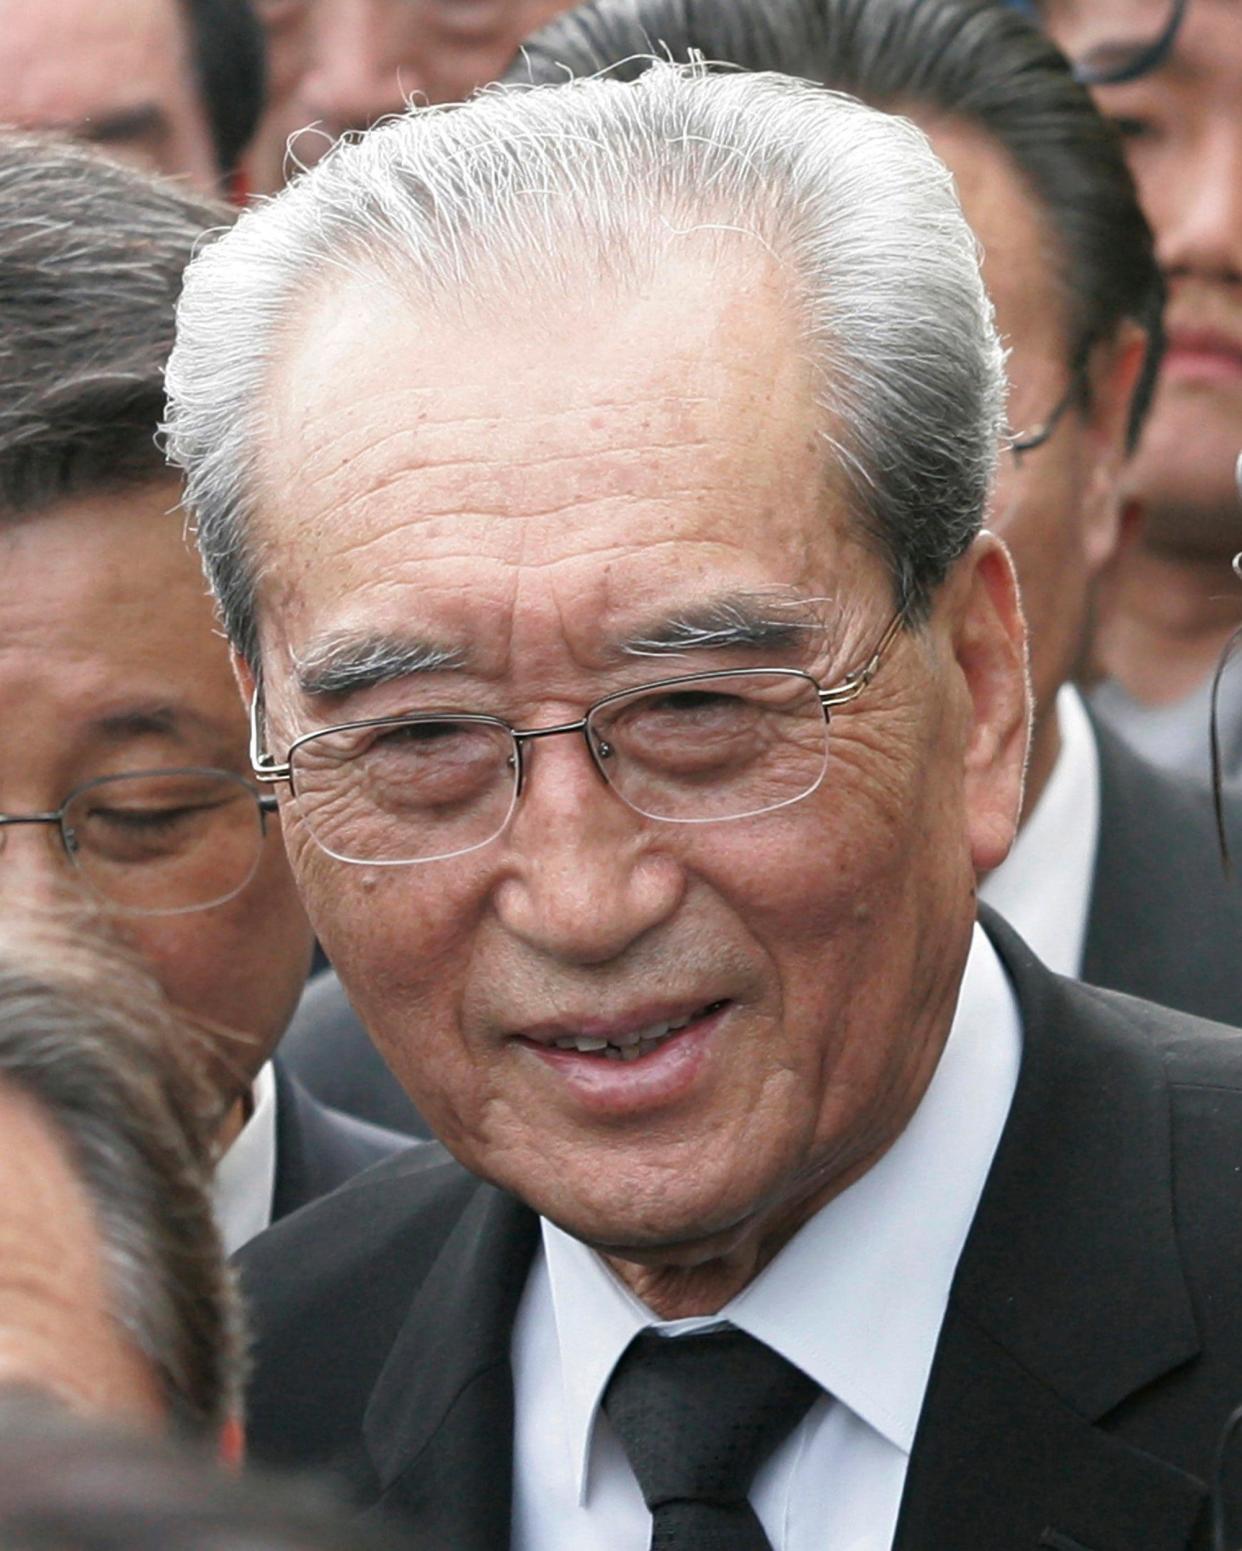 Kim Ki-nam photographed in Seoul after the memorial service to  former South Korean President Kim Dae-jung in 2009